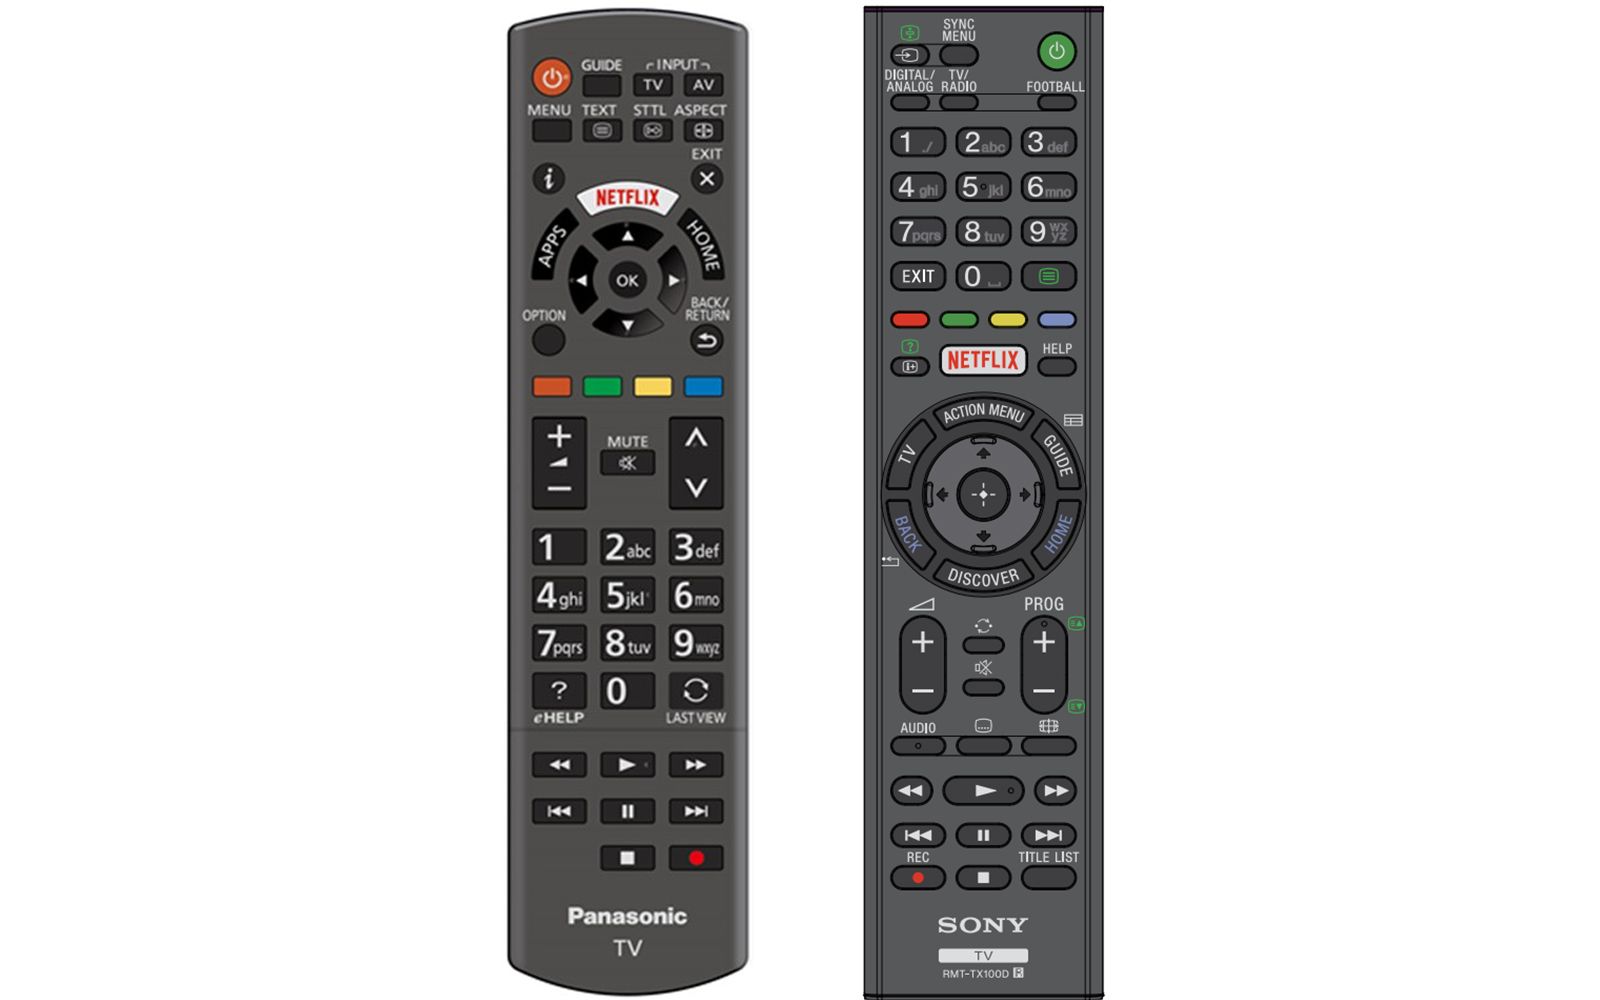 netflix button to appear on more remotes soon samsung sony lg and more onboard image 2